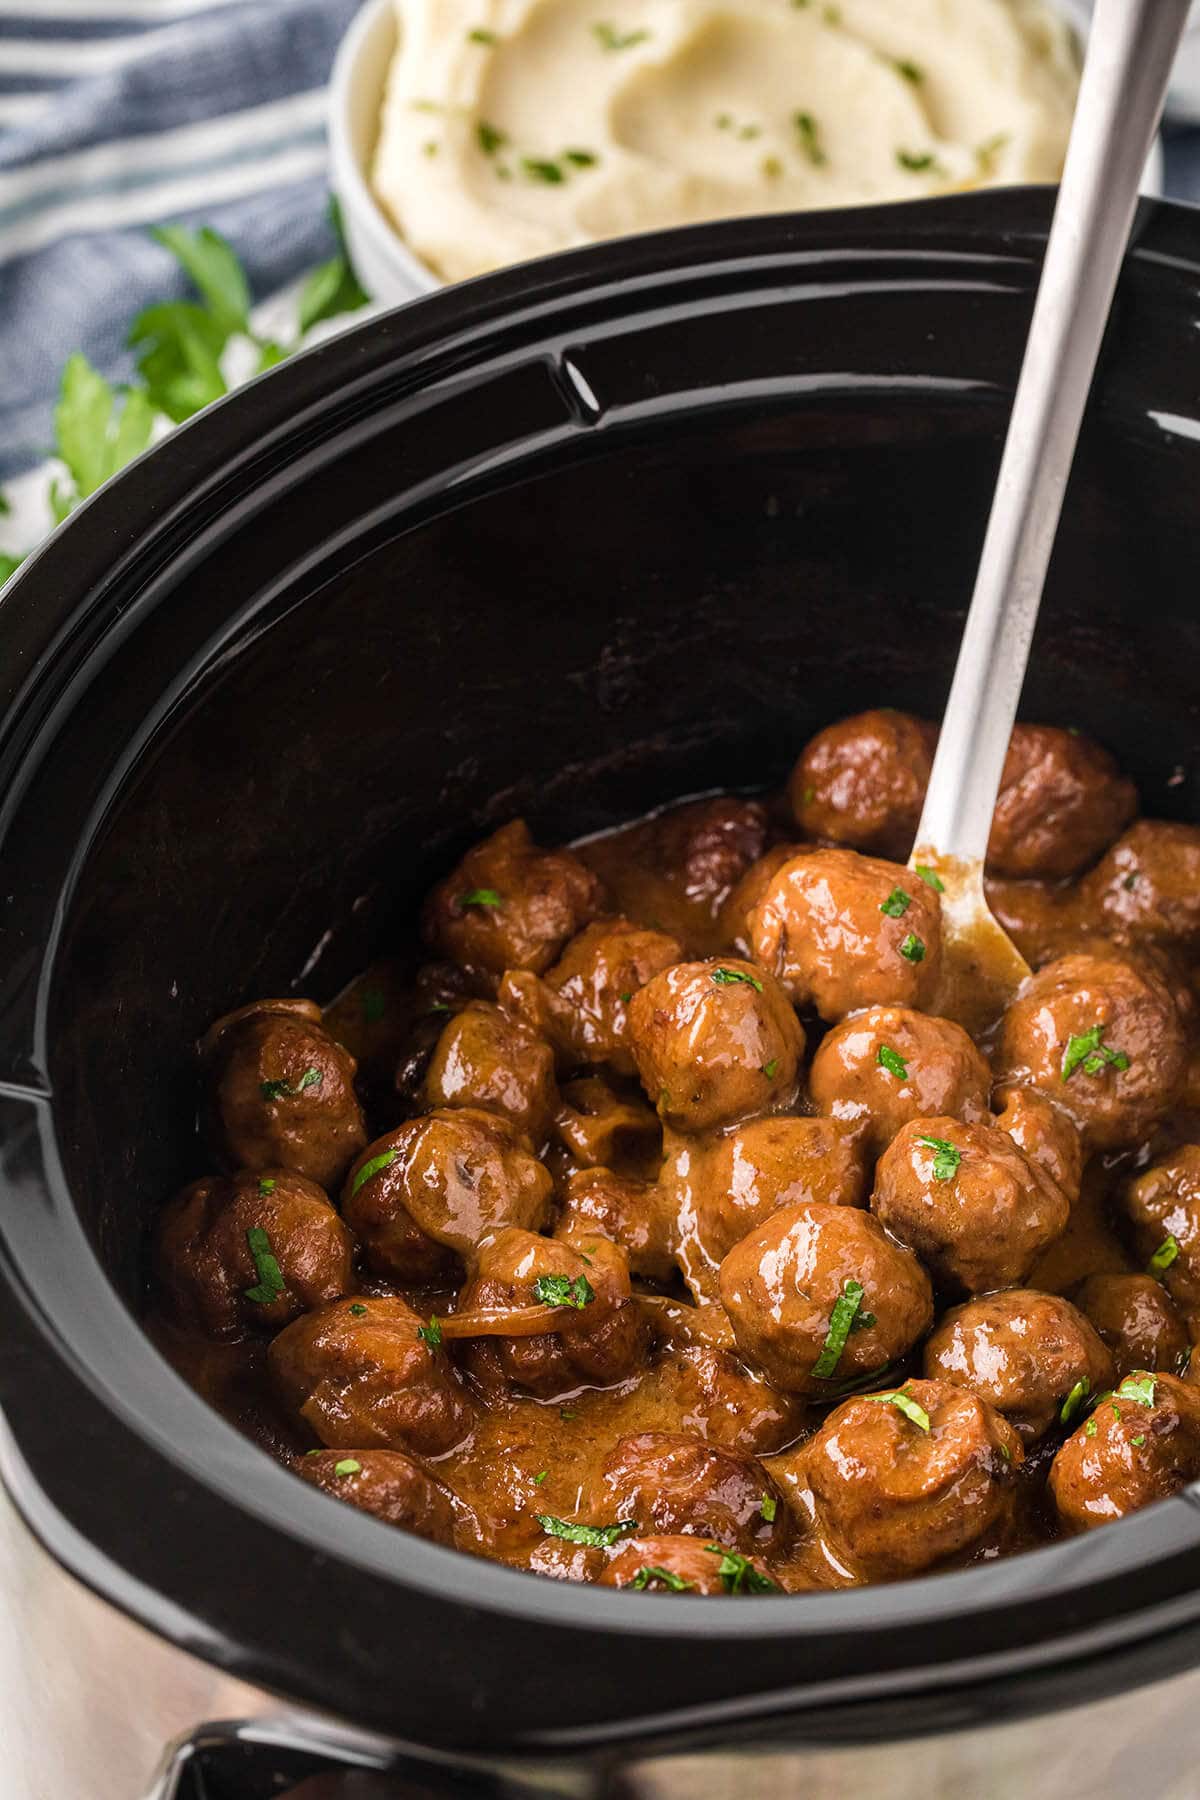 Slow Cooker with meatballs and gravy with serving spoon.